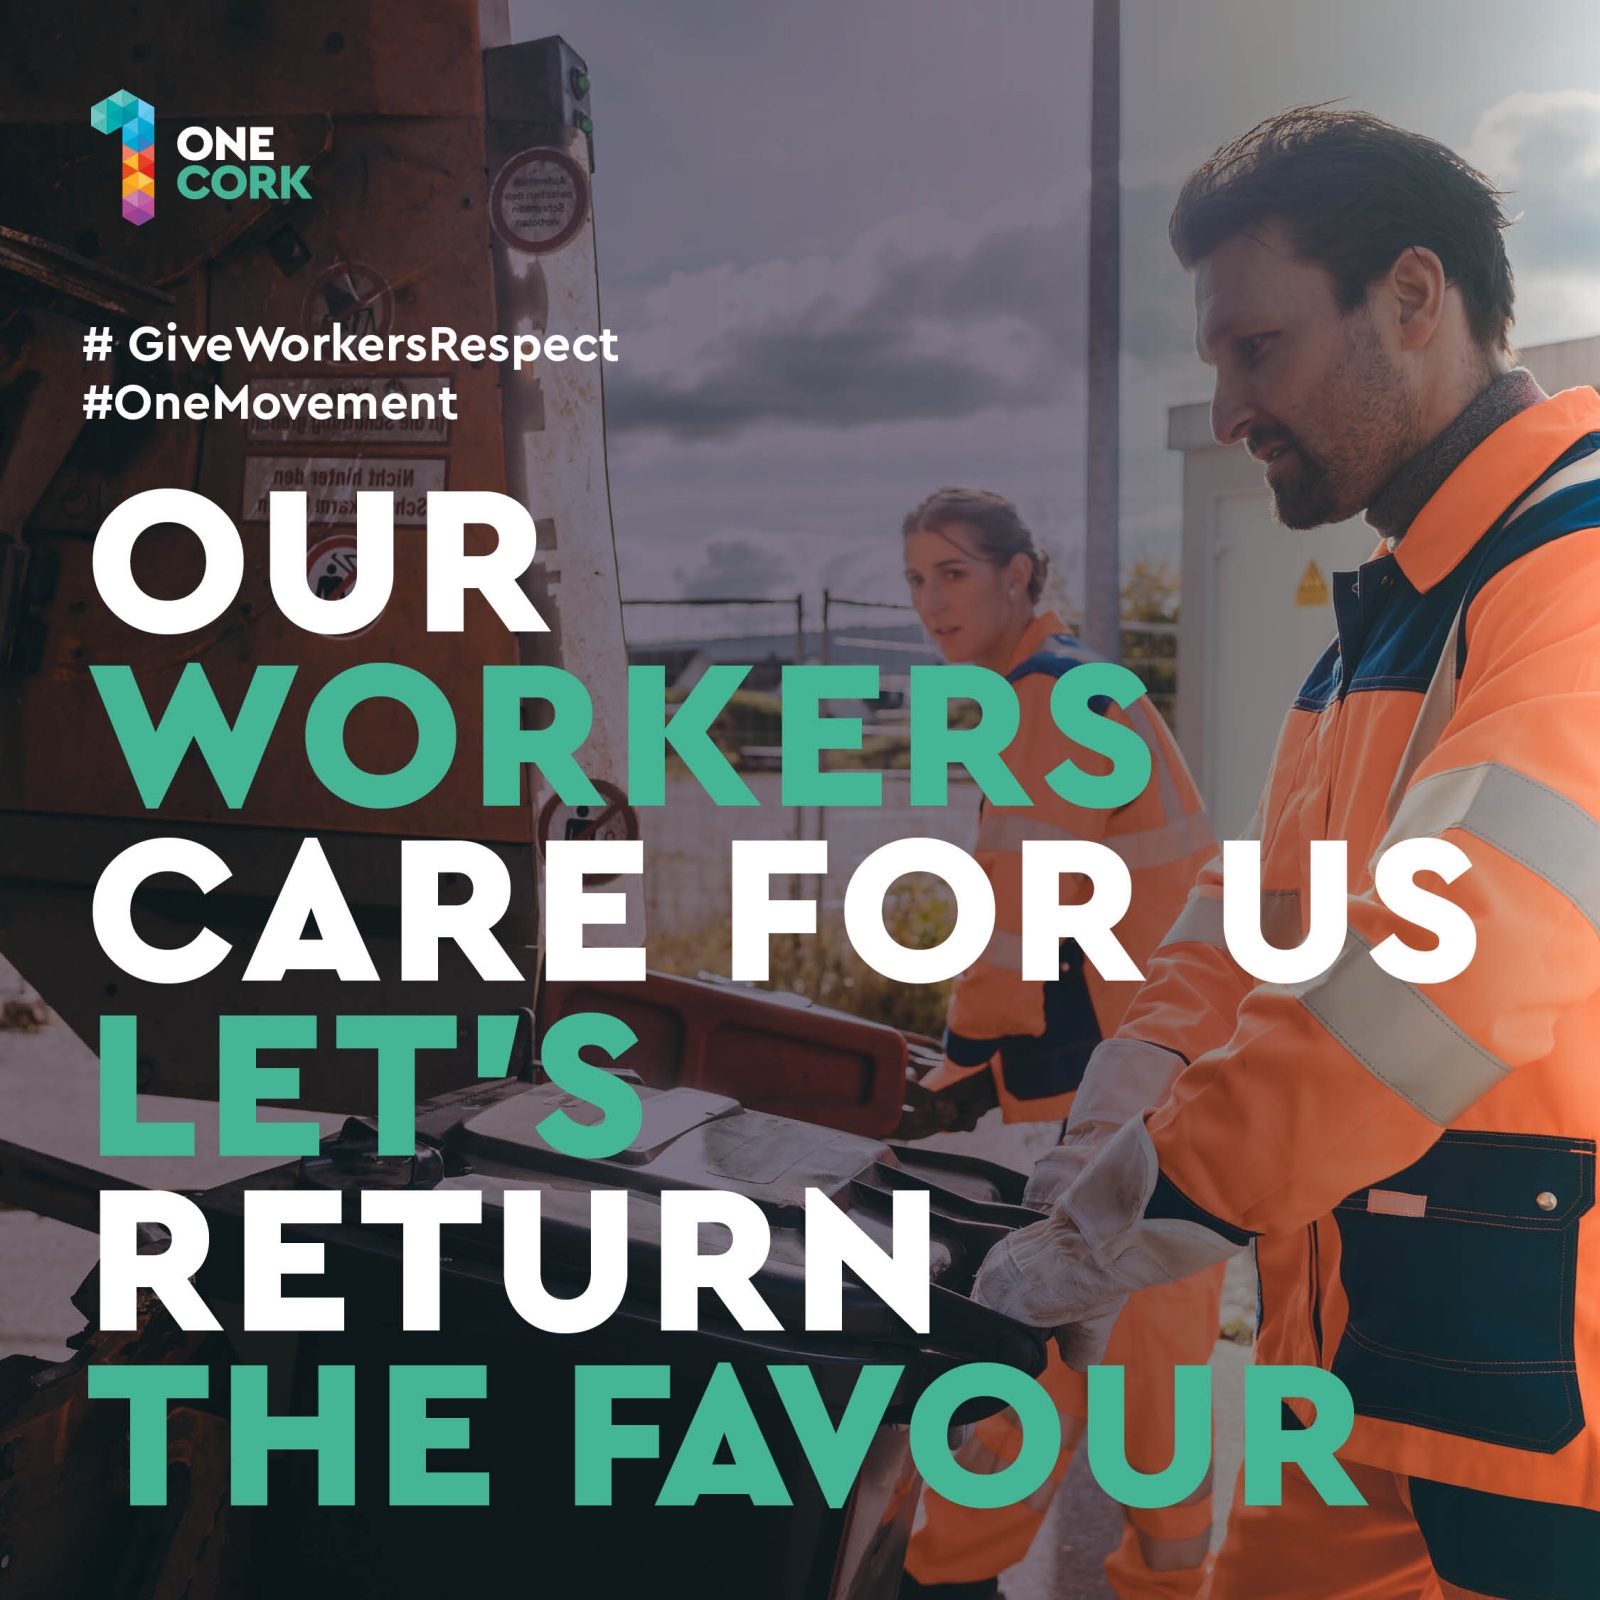 Our workers care for us, lets return the favour